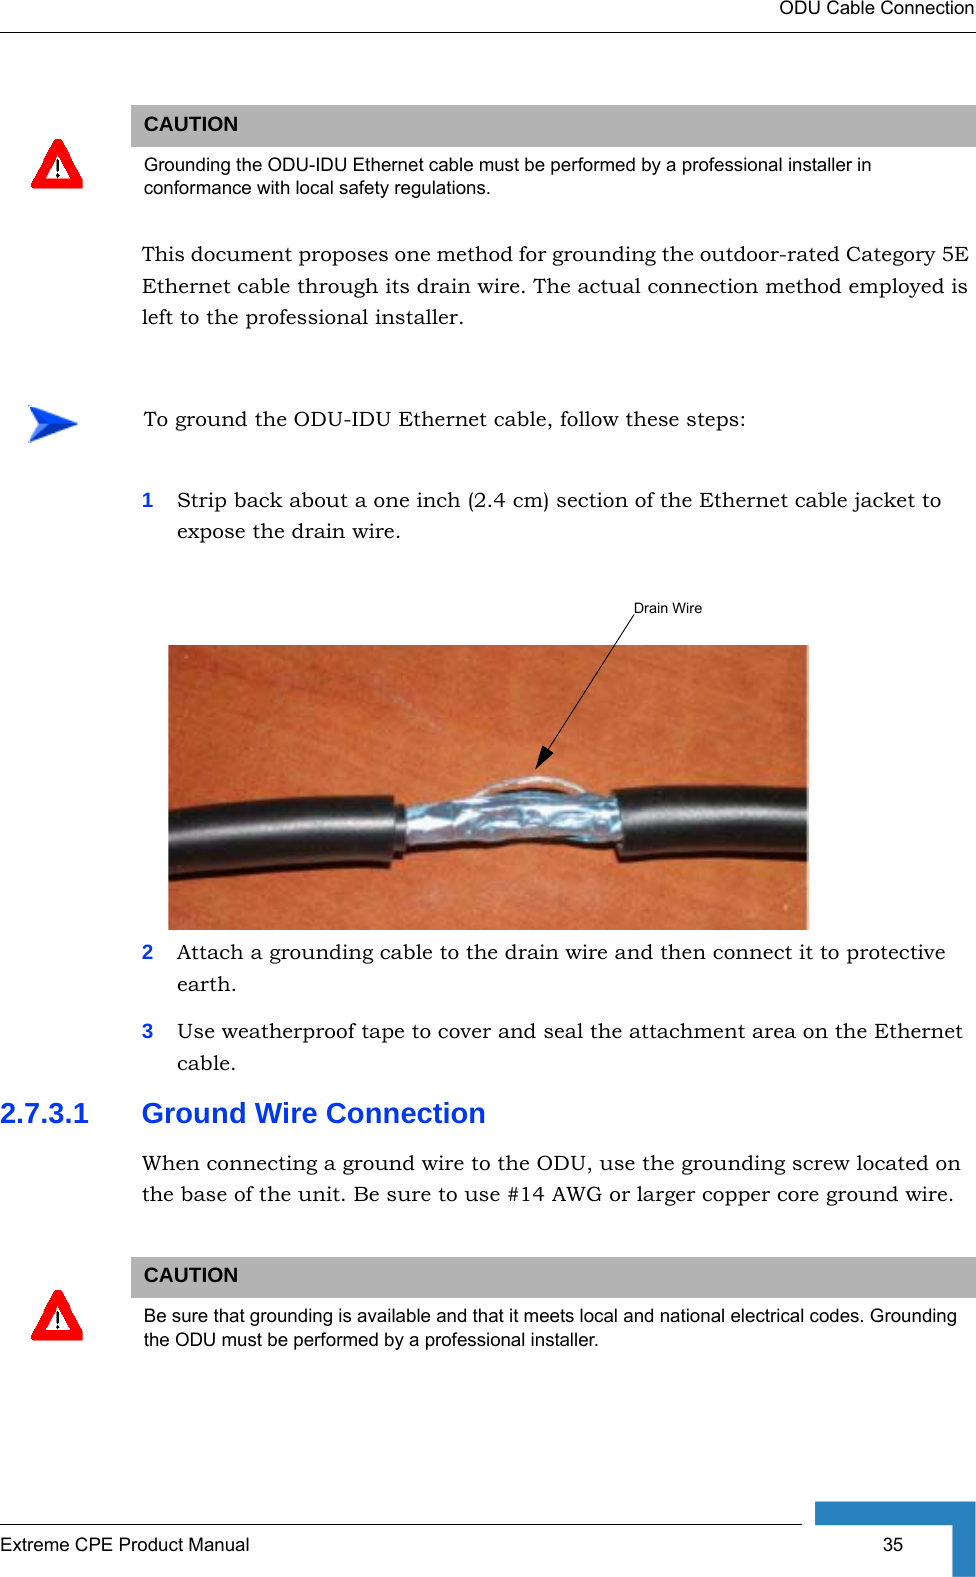 ODU Cable ConnectionExtreme CPE Product Manual  35This document proposes one method for grounding the outdoor-rated Category 5E Ethernet cable through its drain wire. The actual connection method employed is left to the professional installer.1Strip back about a one inch (2.4 cm) section of the Ethernet cable jacket to expose the drain wire.2Attach a grounding cable to the drain wire and then connect it to protective earth.3Use weatherproof tape to cover and seal the attachment area on the Ethernet cable.2.7.3.1 Ground Wire ConnectionWhen connecting a ground wire to the ODU, use the grounding screw located on the base of the unit. Be sure to use #14 AWG or larger copper core ground wire.CAUTIONGrounding the ODU-IDU Ethernet cable must be performed by a professional installer in conformance with local safety regulations.To ground the ODU-IDU Ethernet cable, follow these steps:CAUTIONBe sure that grounding is available and that it meets local and national electrical codes. Grounding the ODU must be performed by a professional installer.Drain Wire